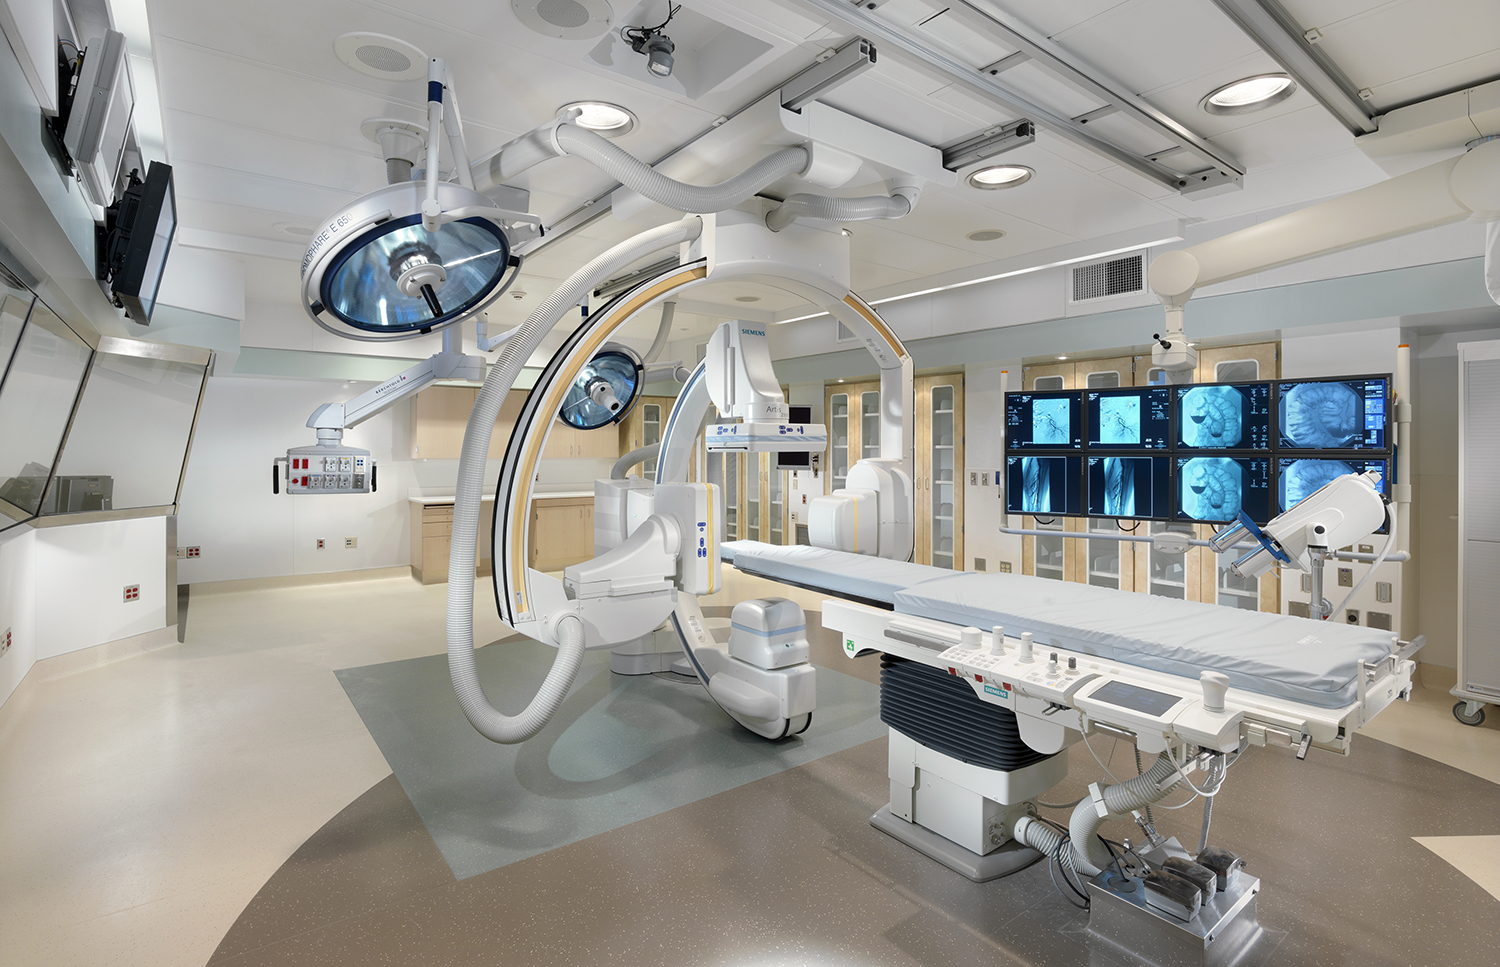 The new Hybrid OR Cath Labs for Stanford Hospital creates state-of-the-art hybrid interventional radiology/neurosurgical operating rooms used for cardiac catheterization, angiography, and neurosurgery.